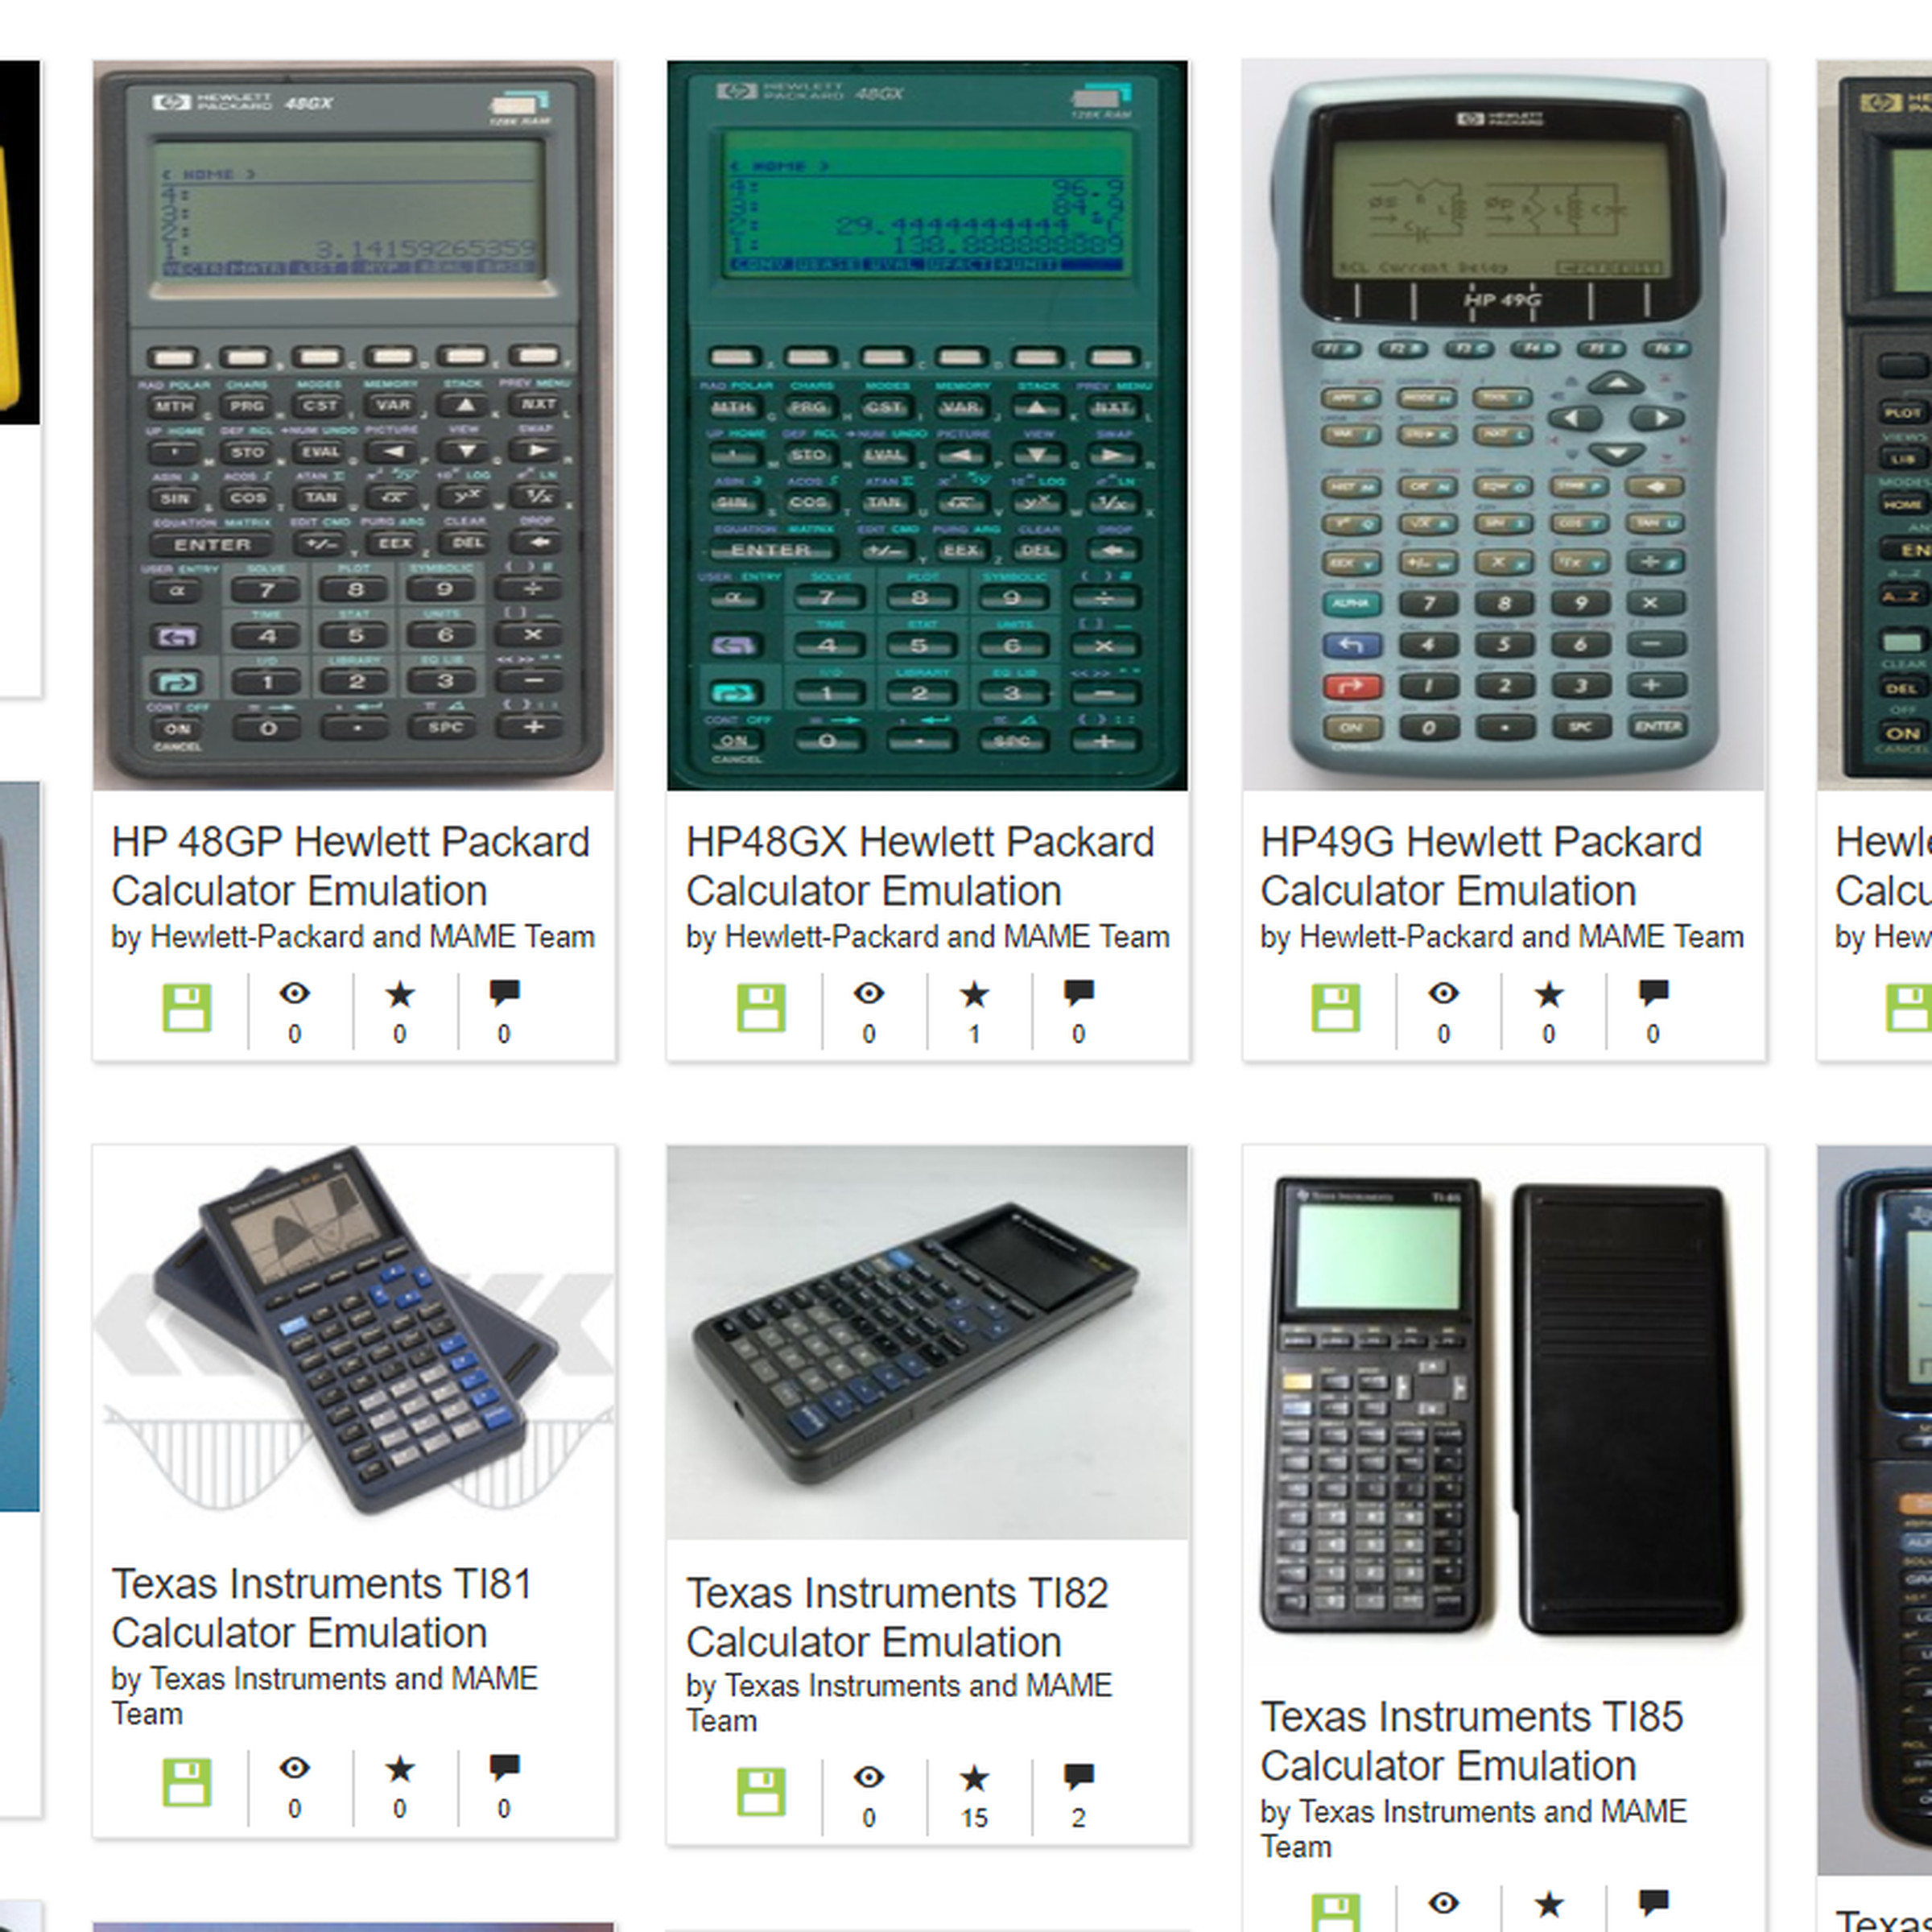 An image showing the Calculator Drawer on Internet Archive